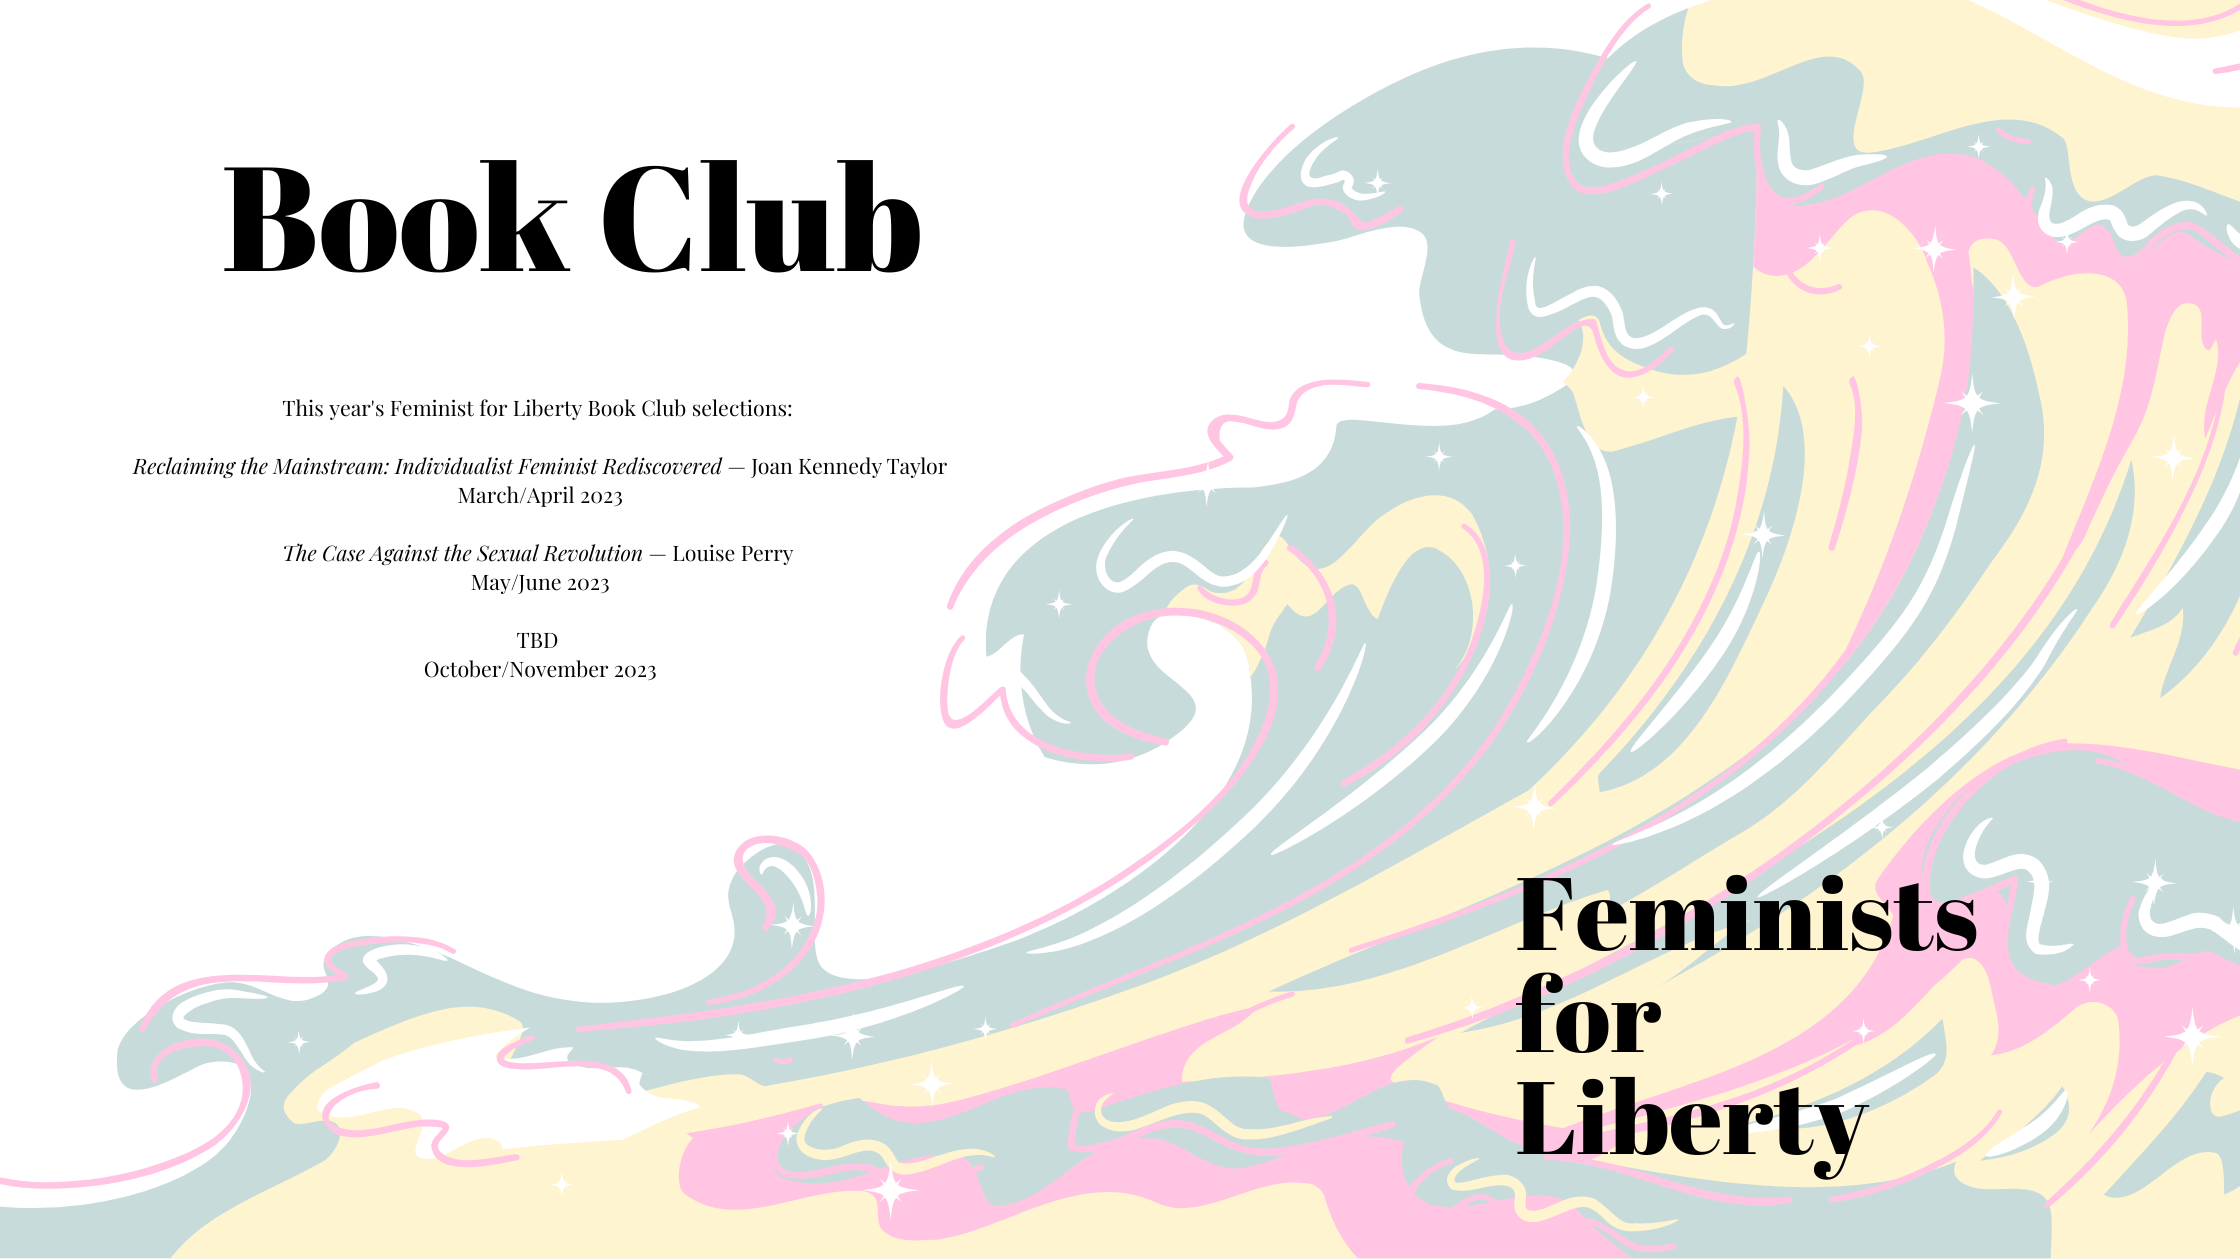 Introducing the Feminists for Liberty Book Club